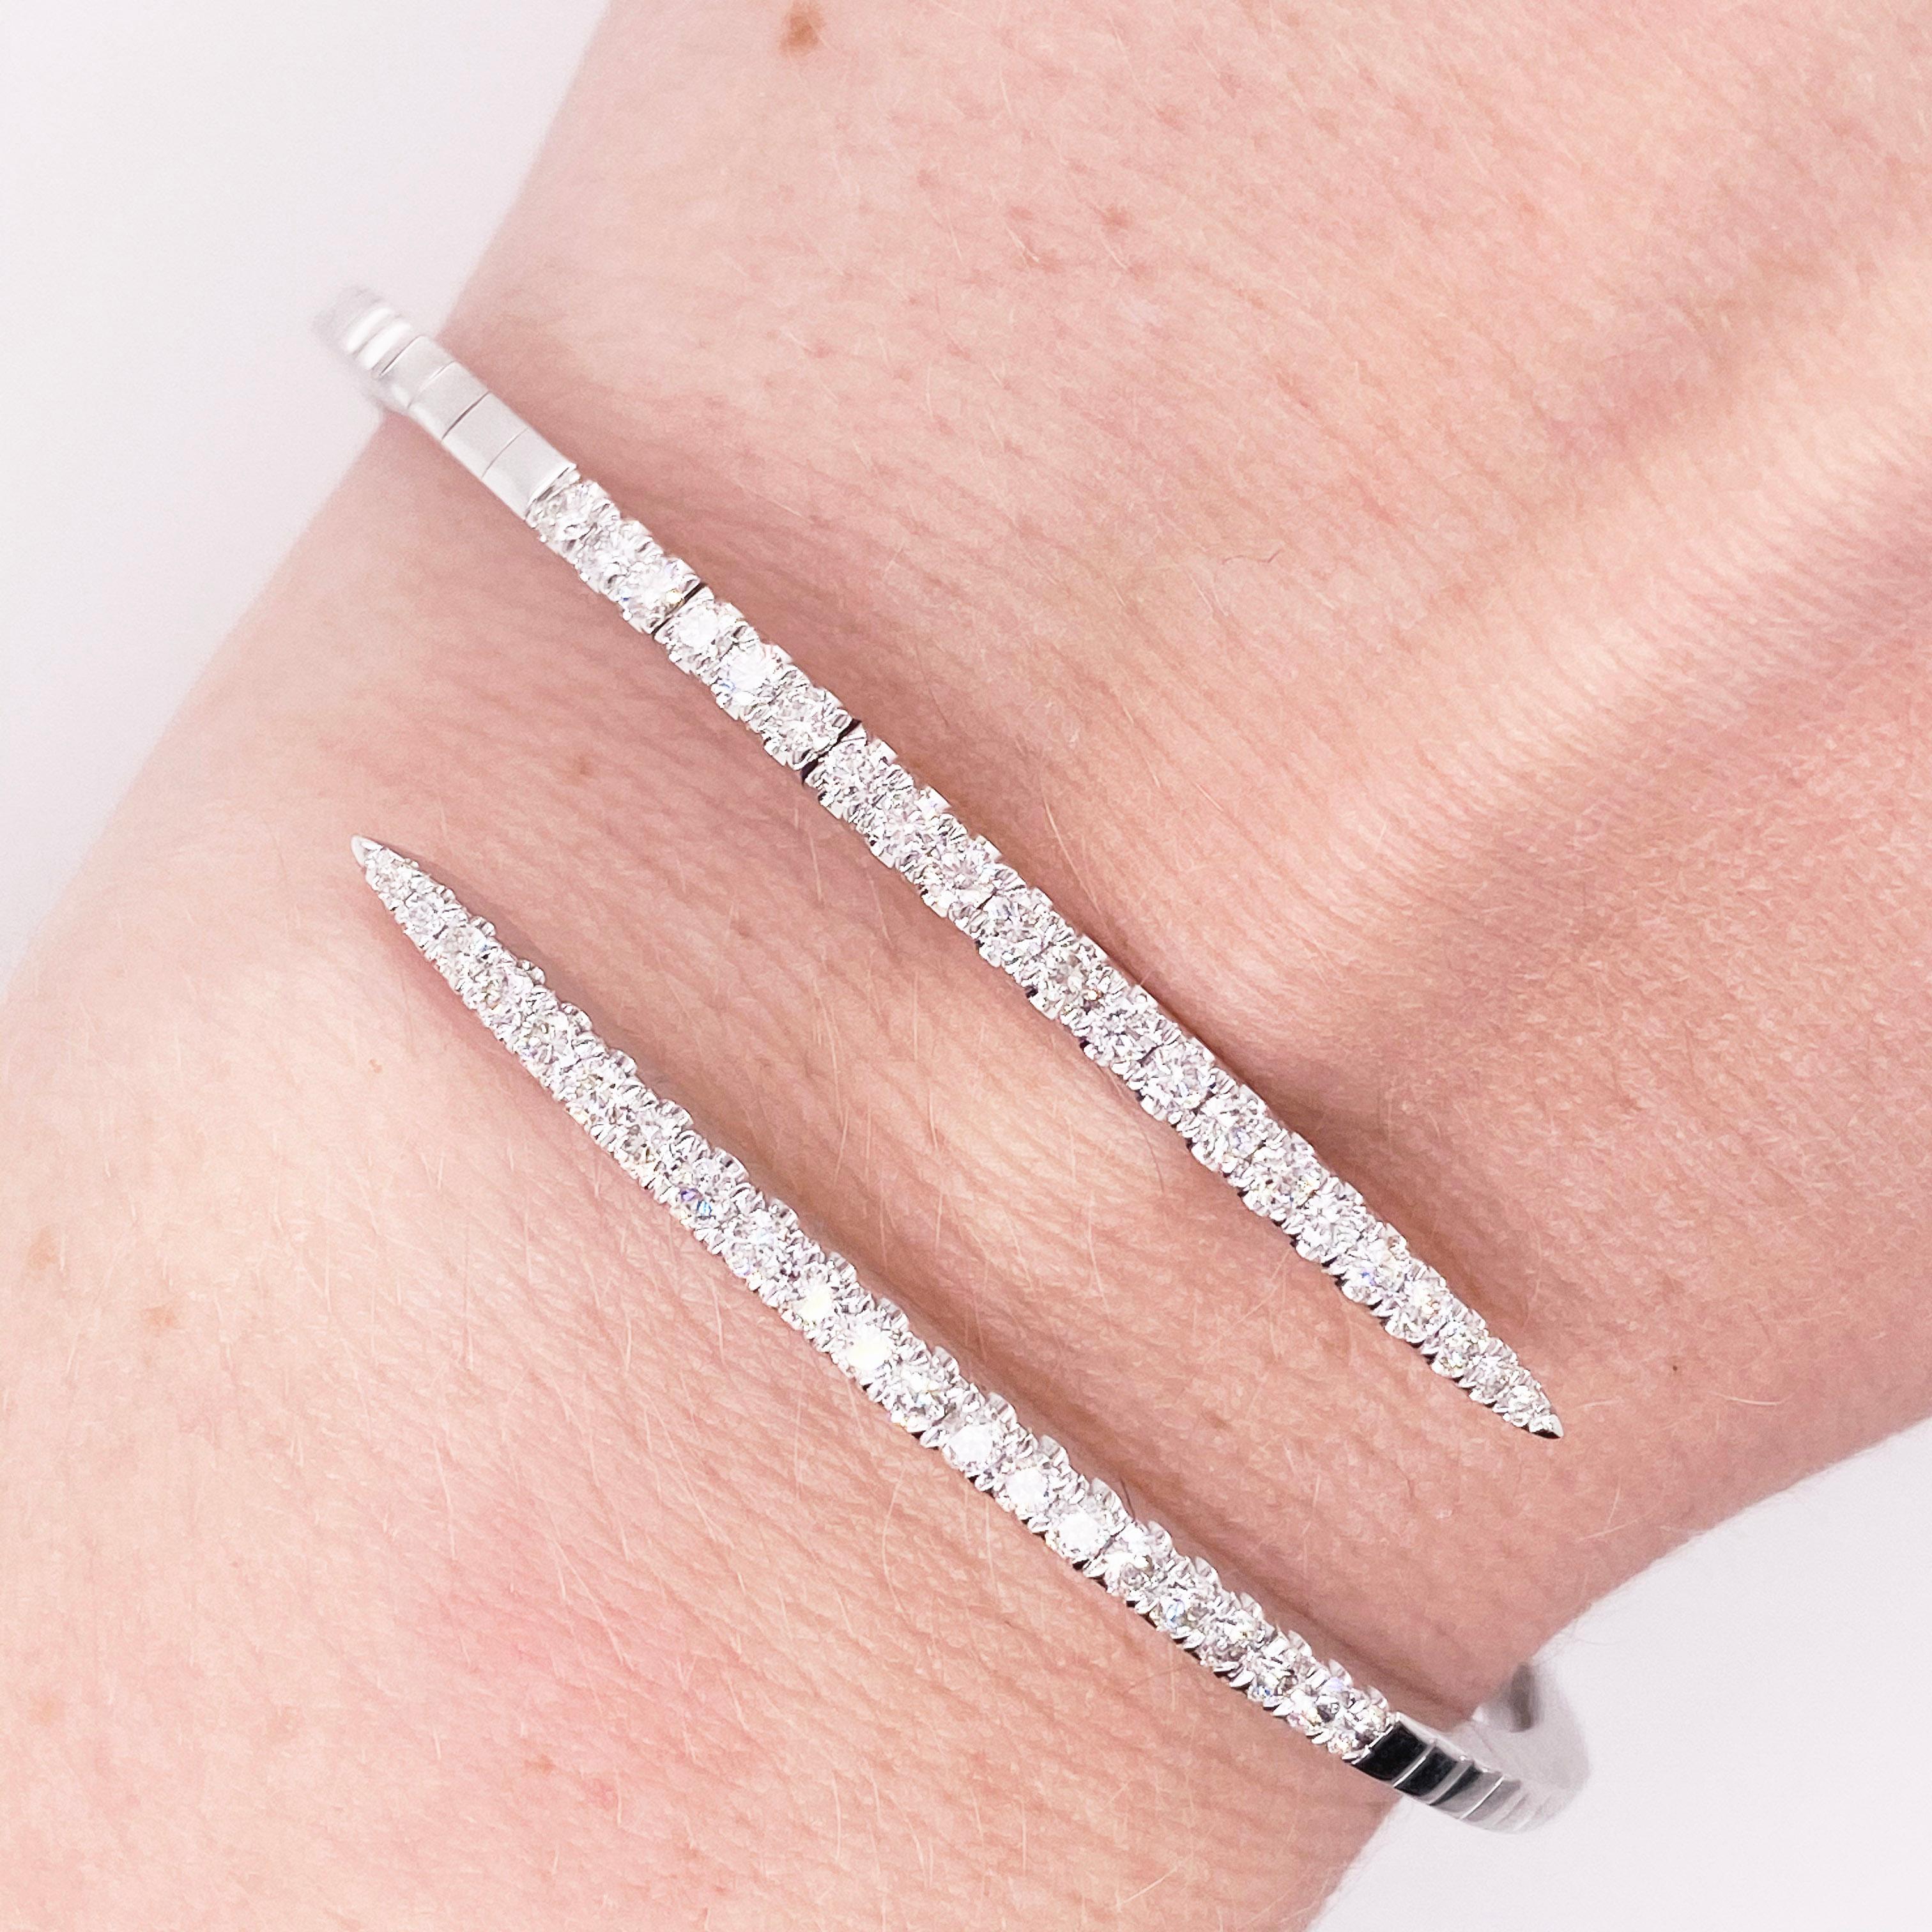 This Gold wrap bracelet is stunningly beautiful polished white gold split bypass bangle bracelet dripping with round diamonds provides a look that is very classic and modern at the same time! This bracelet is very fashionable and can add a touch of